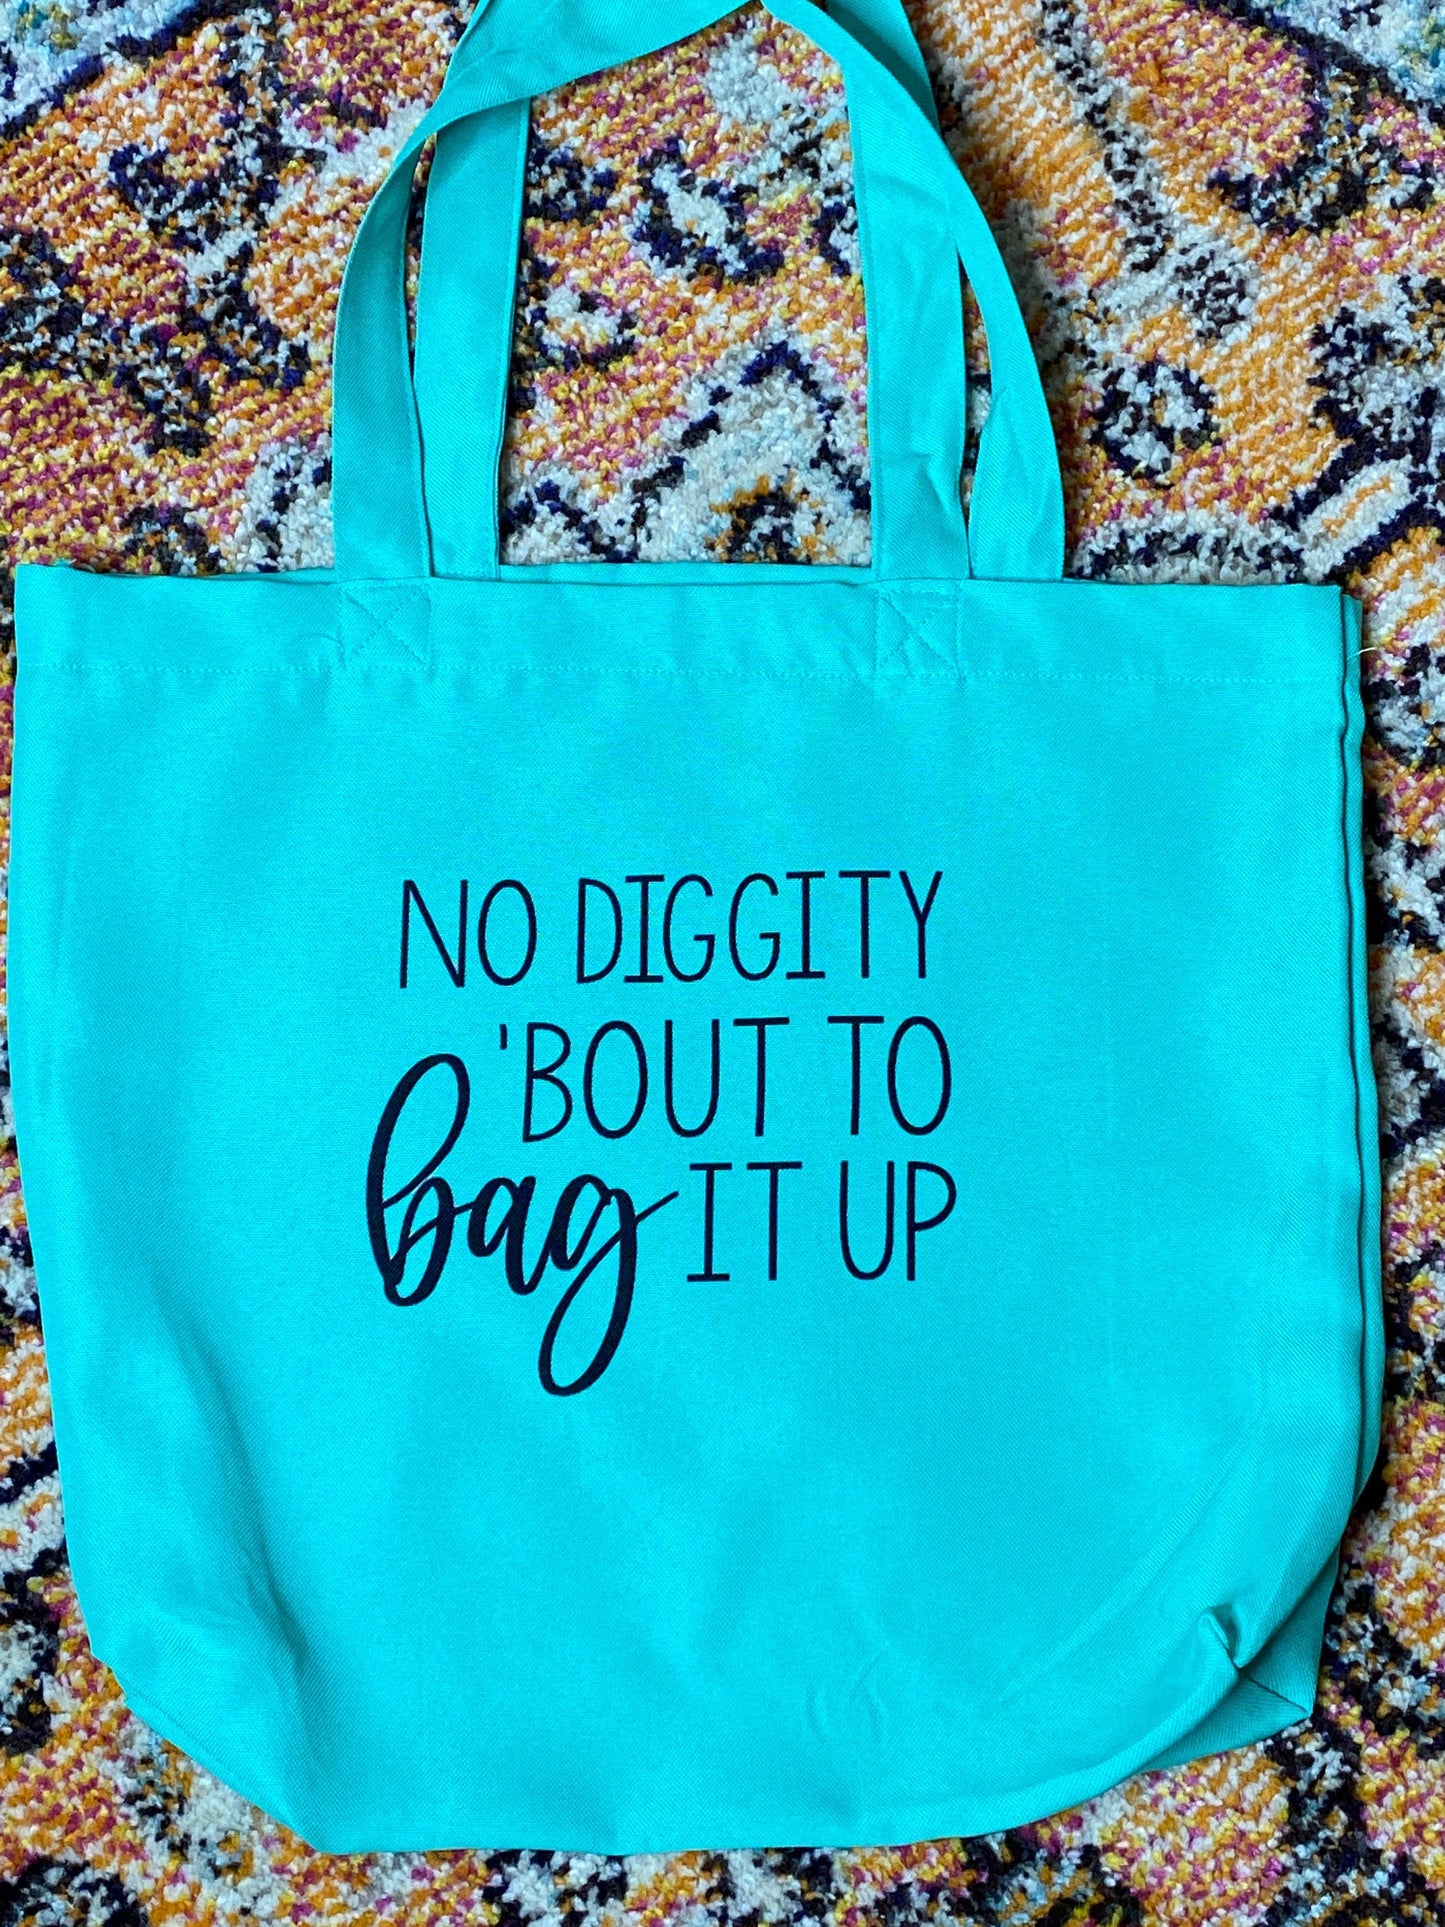 No Diggity Bout To Bag It Up Tote Bag, Reusable Tote Bag - Binnie & Bopper Designs